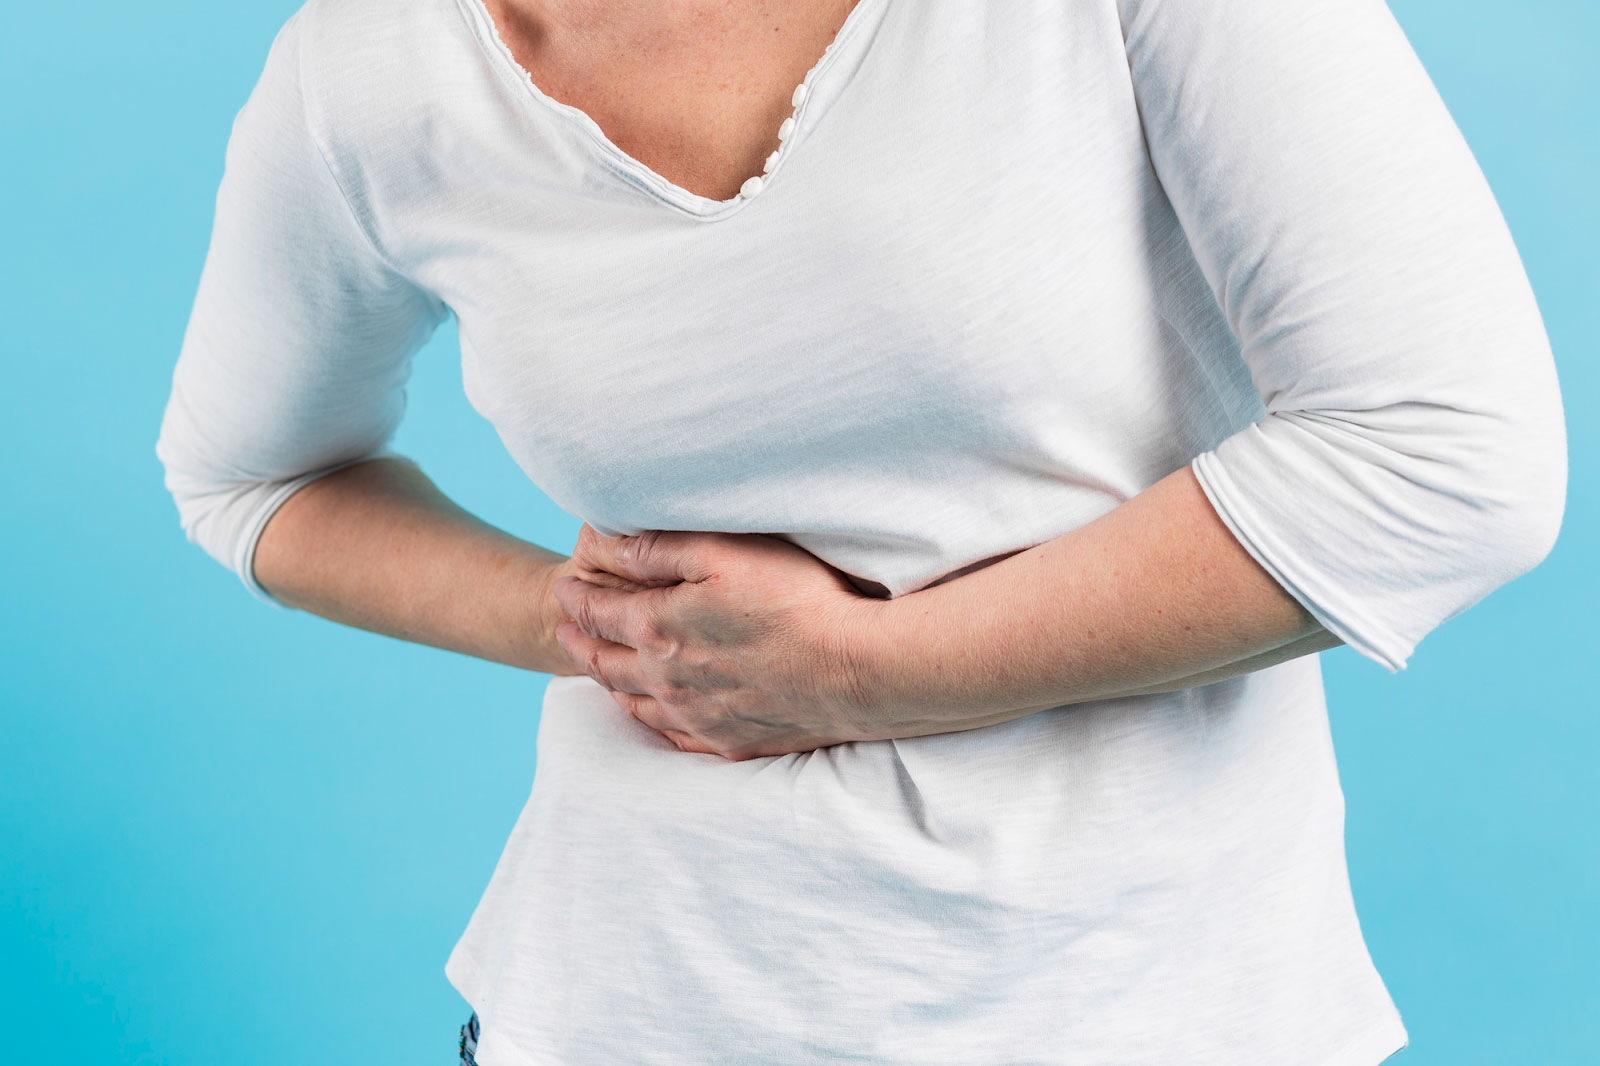 Can Appendicitis Pain Come And Go?